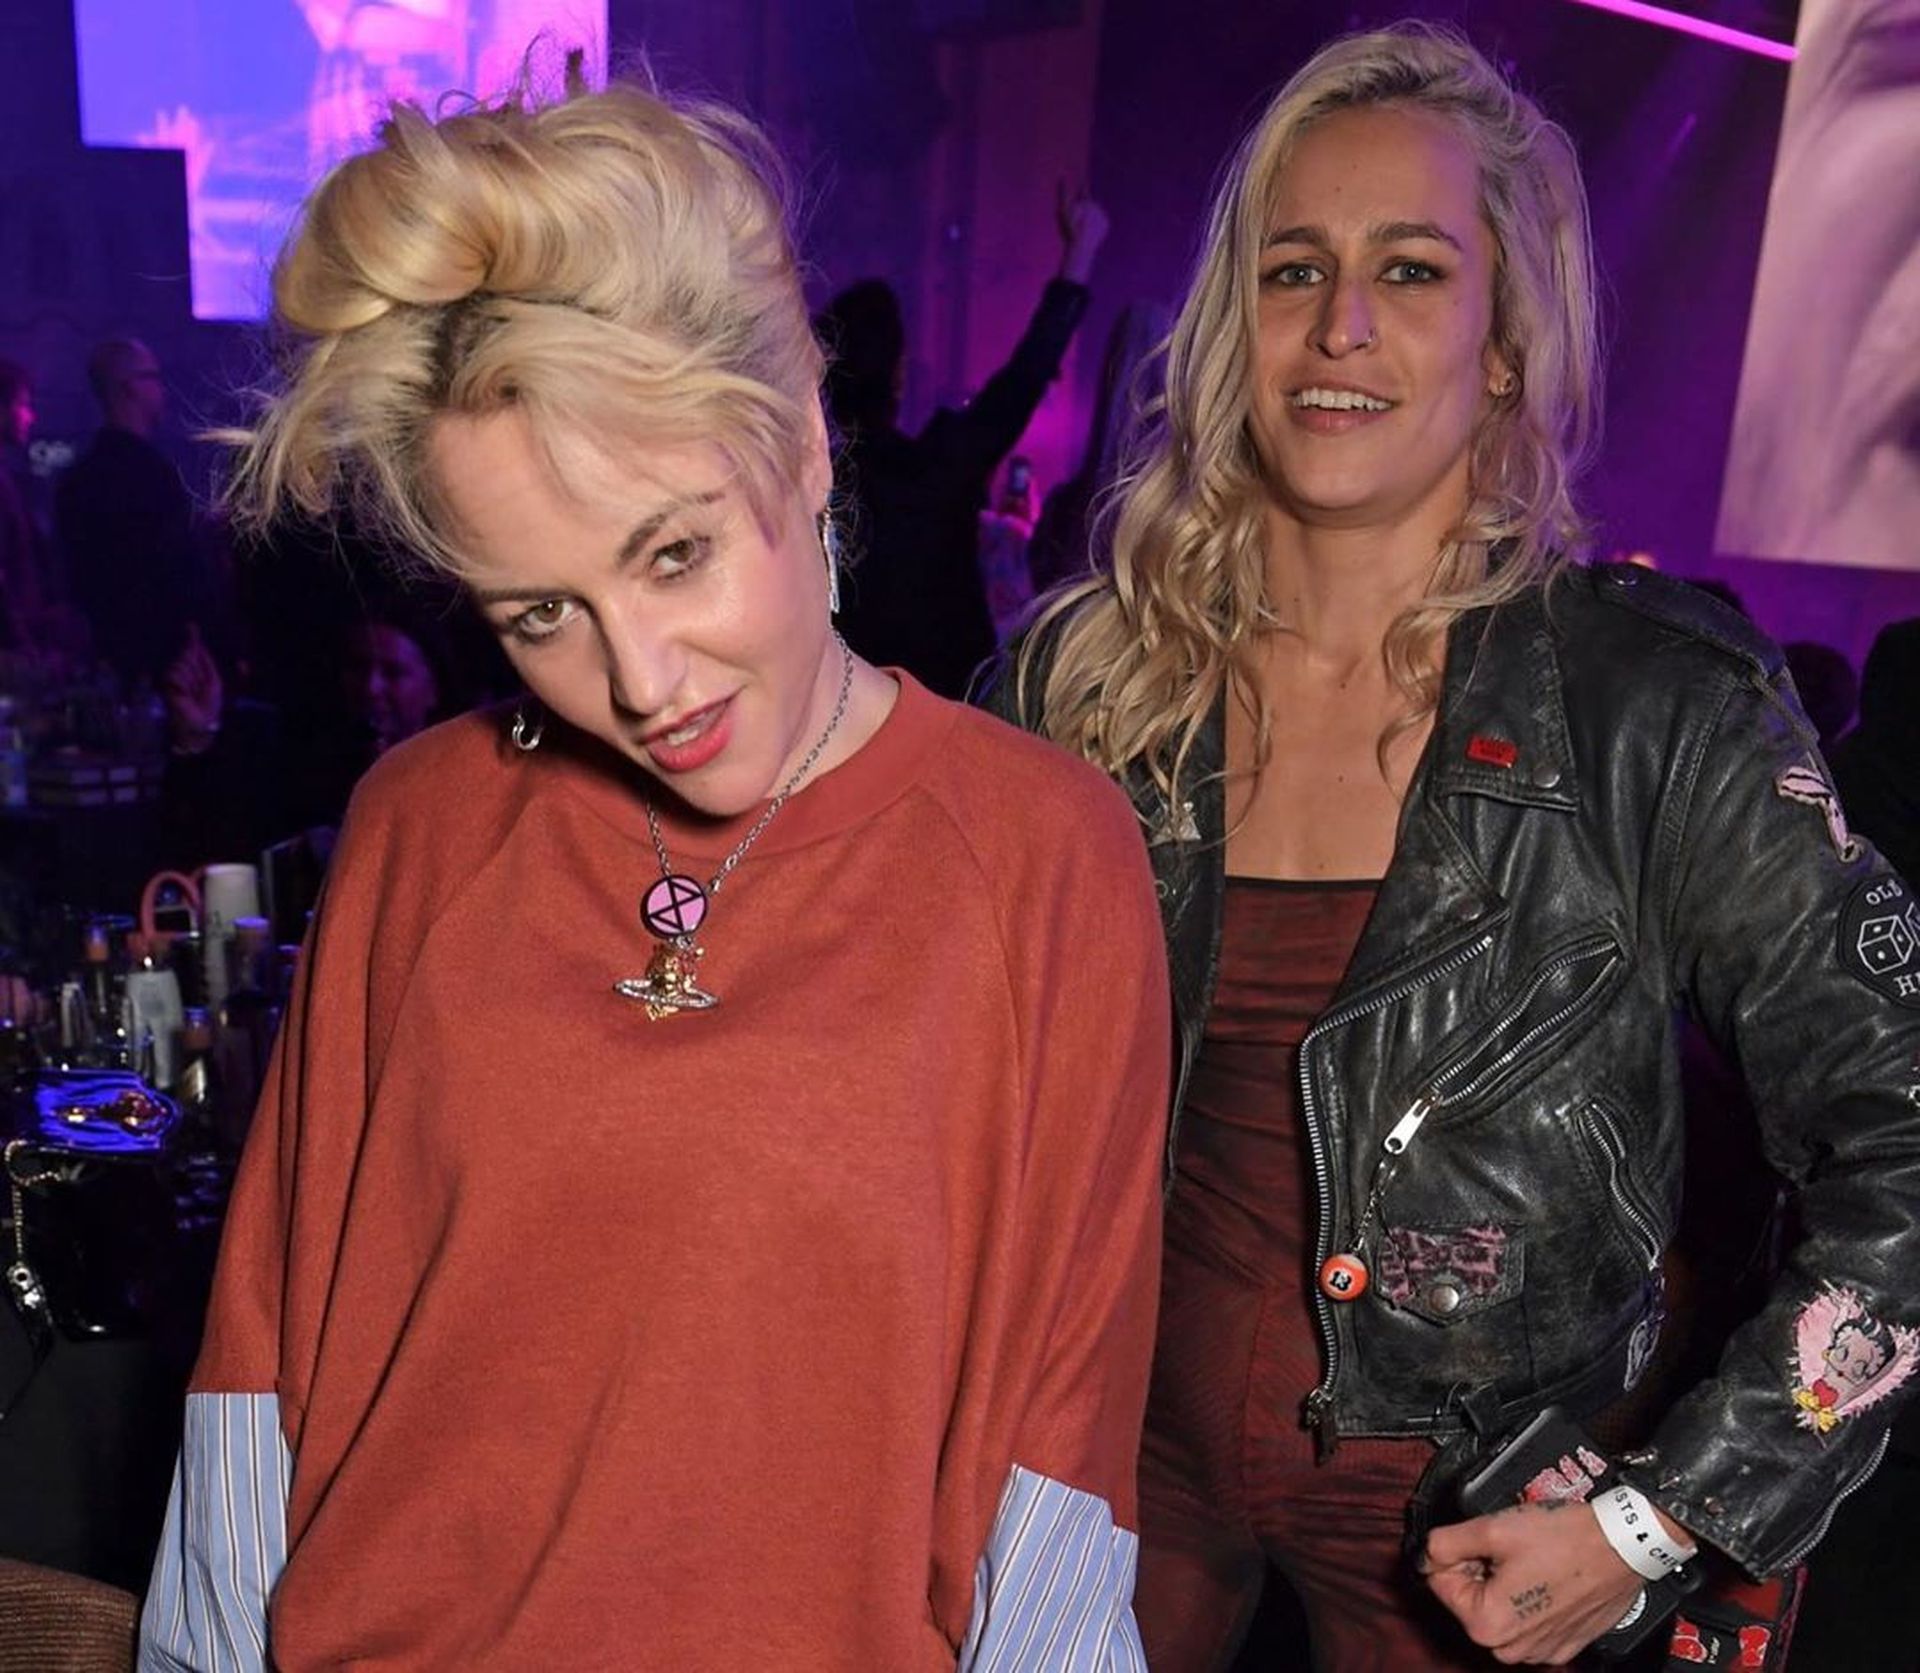 Alice Dellal Shows Her Tits at the NME Awards After Party (25 Photos)